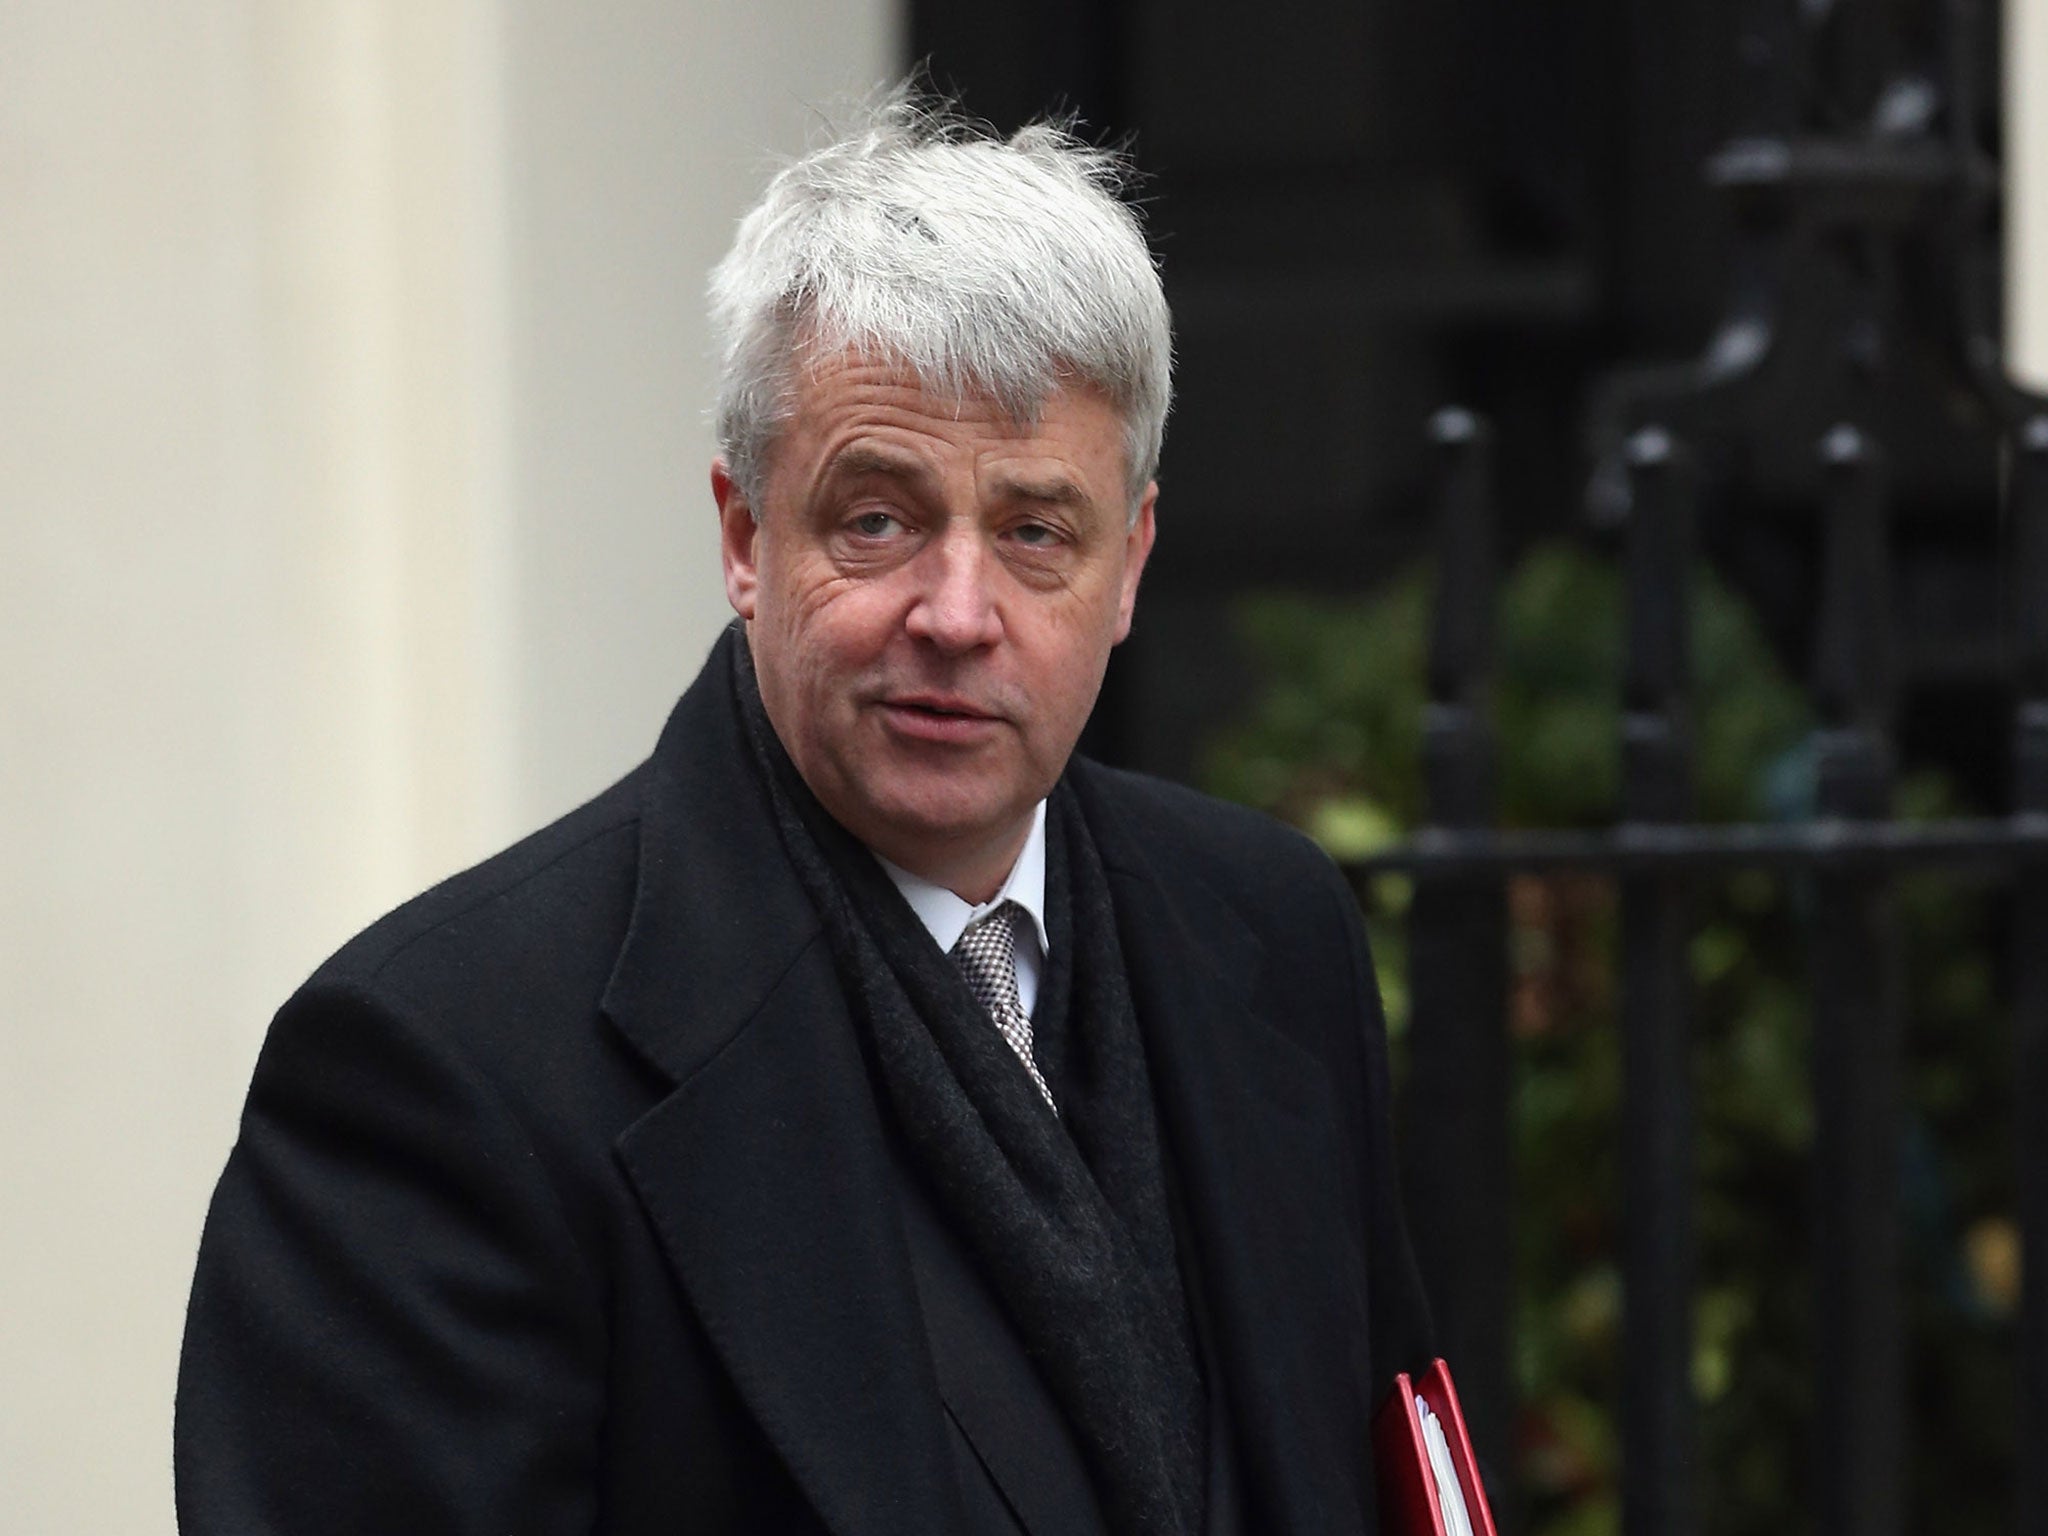 One expert said that former Health Secretary, Andrew Lansley, would be facing disciplinary action if he had been a doctor